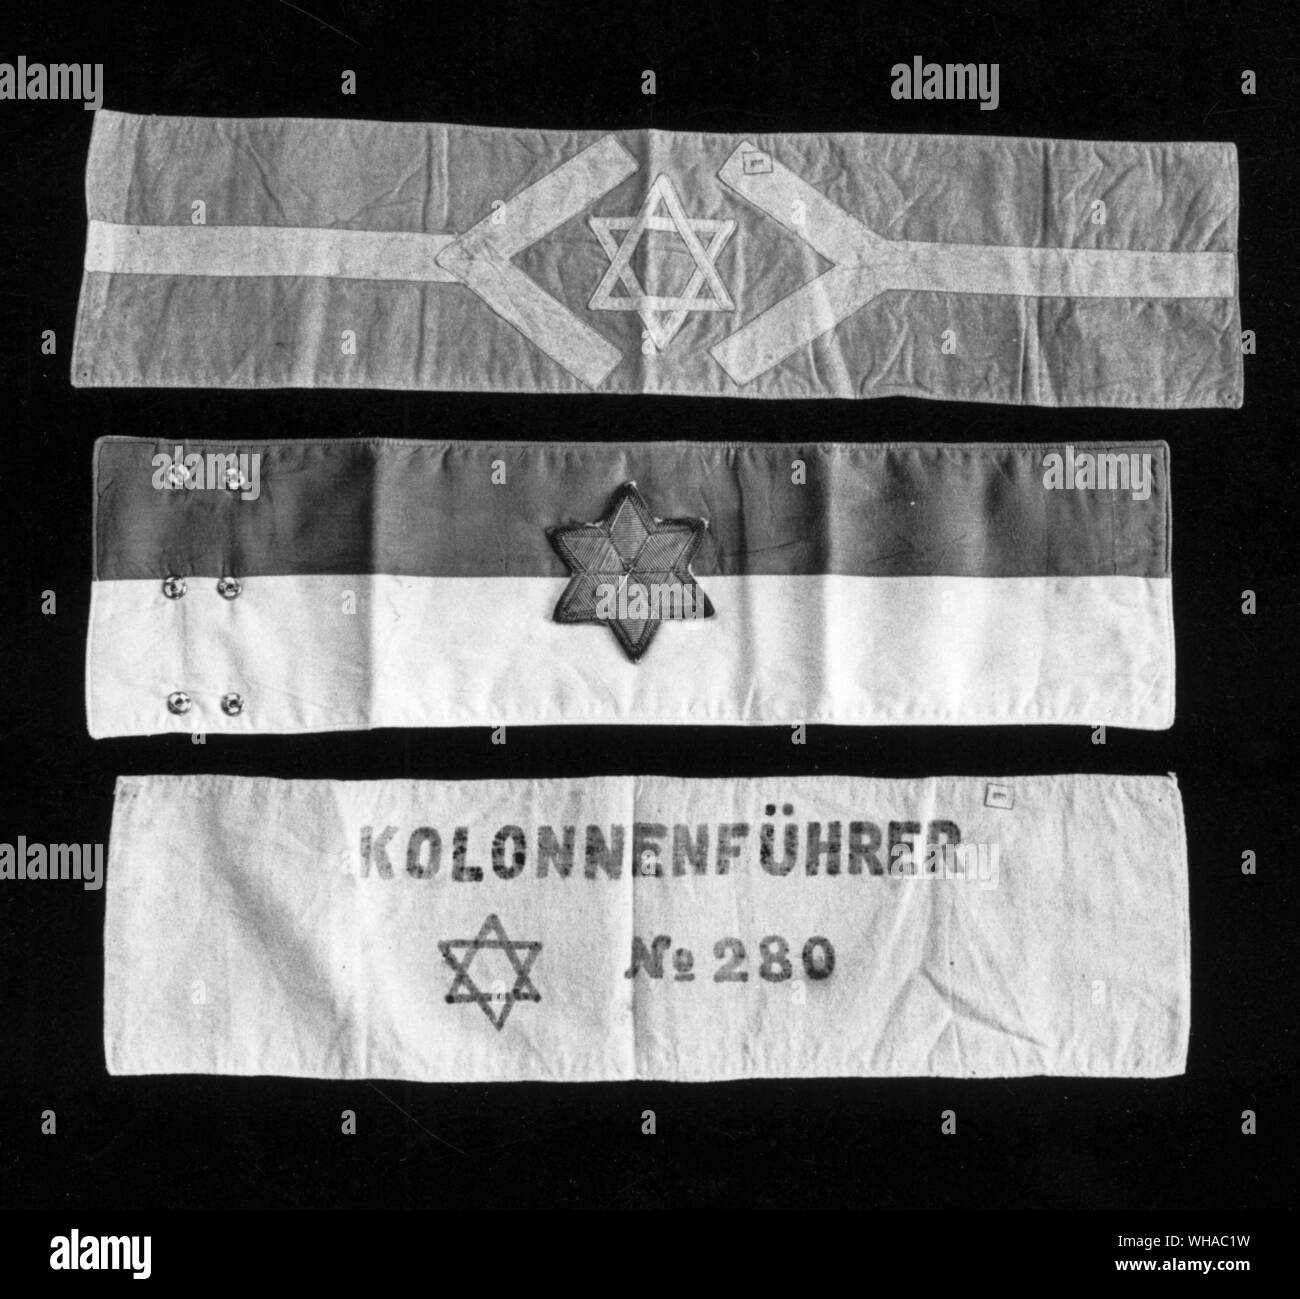 Vilna armbands. The Nazis ordered Jews to wear identifying badges or armbands and also required many Jews to perform forced labor for the German Reich. Daily life in the ghettos was administered by Nazi-appointed Jewish councils (Judenraete) and Jewish police, whom the Germans forced to maintain order inside the ghetto and to facilitate deportations to the extermination camps. . Stock Photo